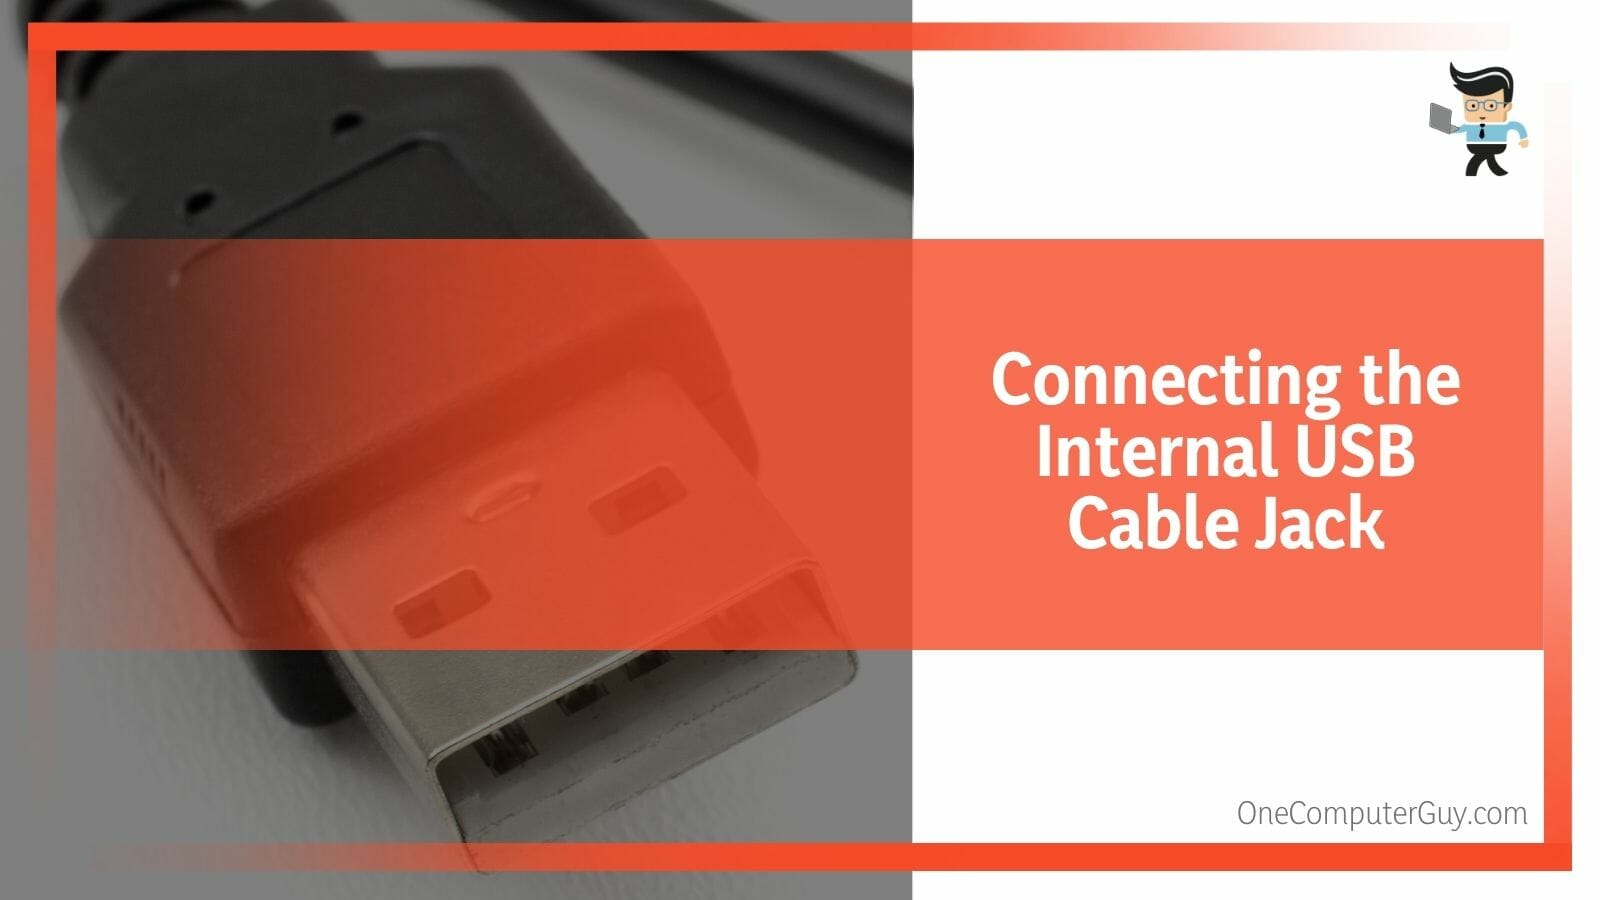 Connecting the Internal USB Cable Jack